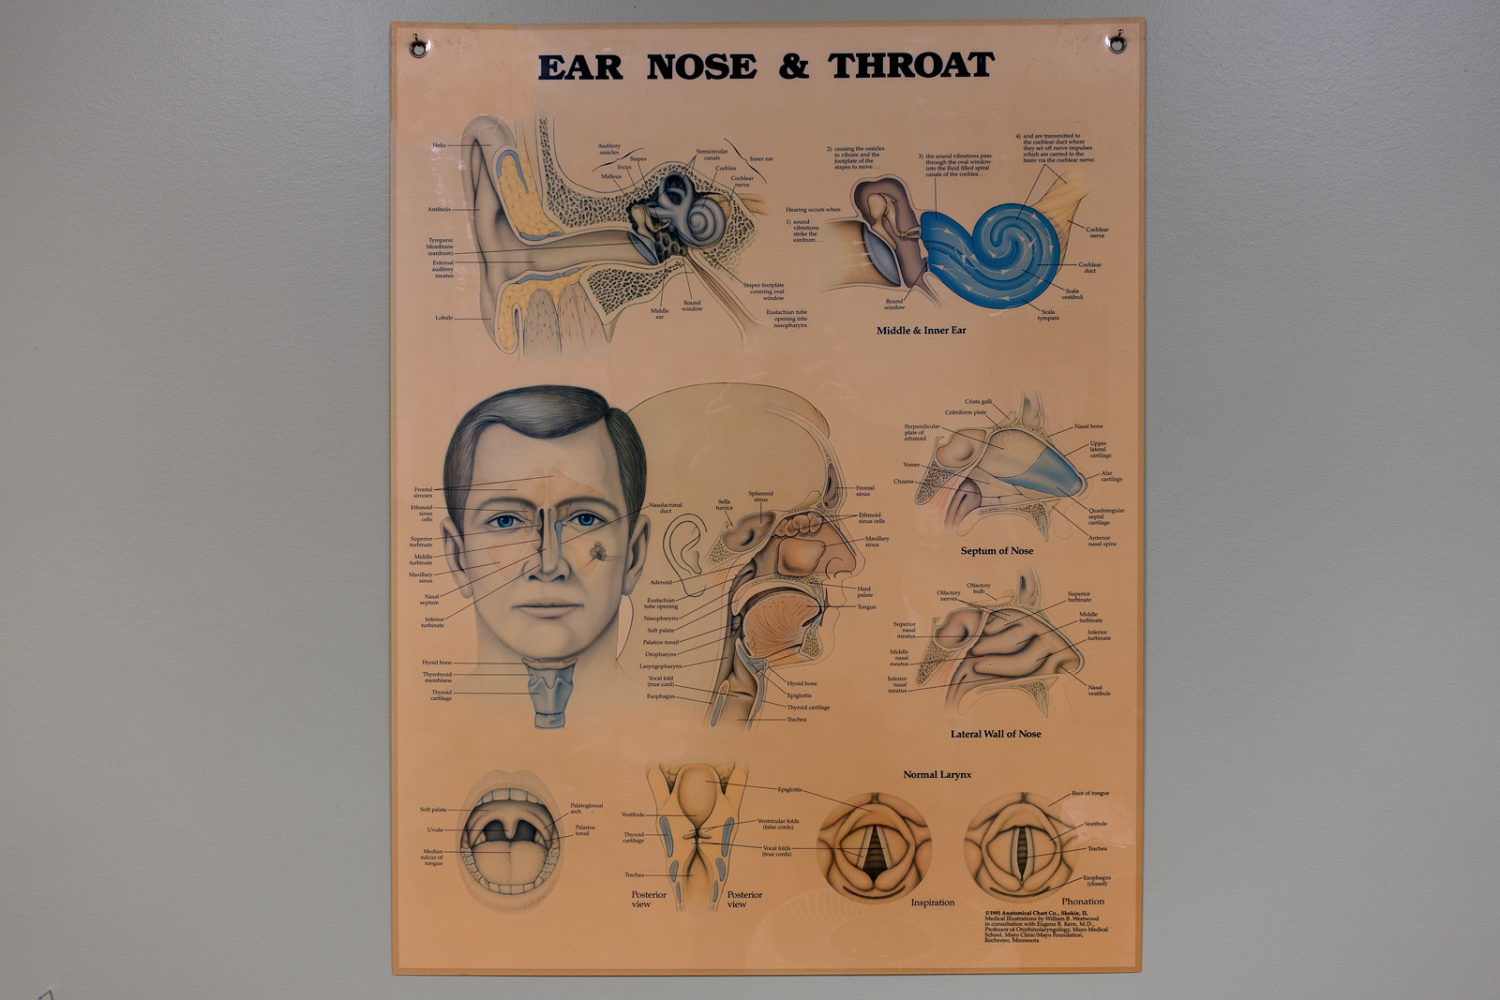 Wall chart at Ear Nose and Throat doctor